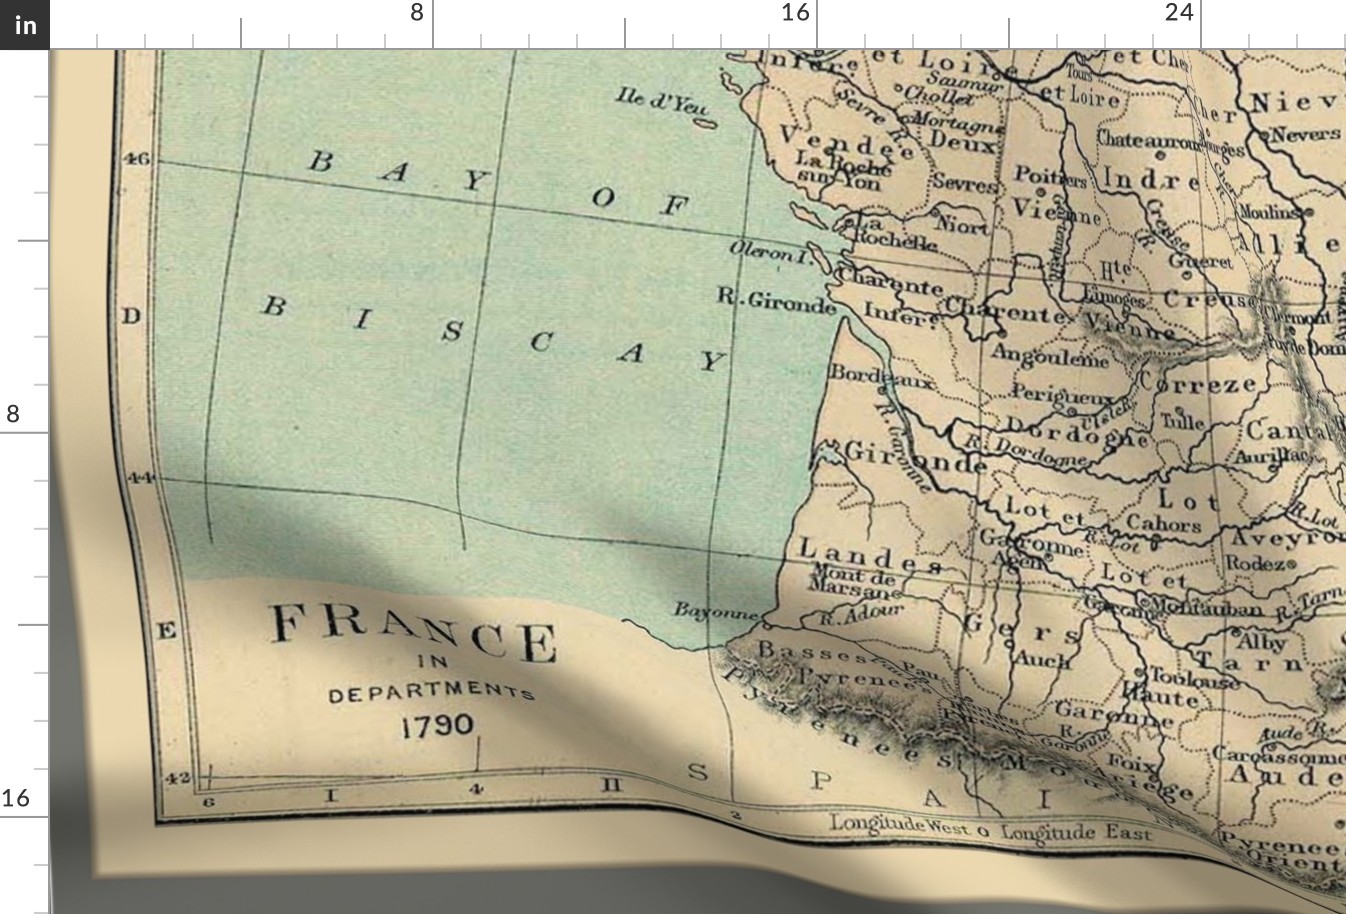 1790 map of France, XL (48" wide)